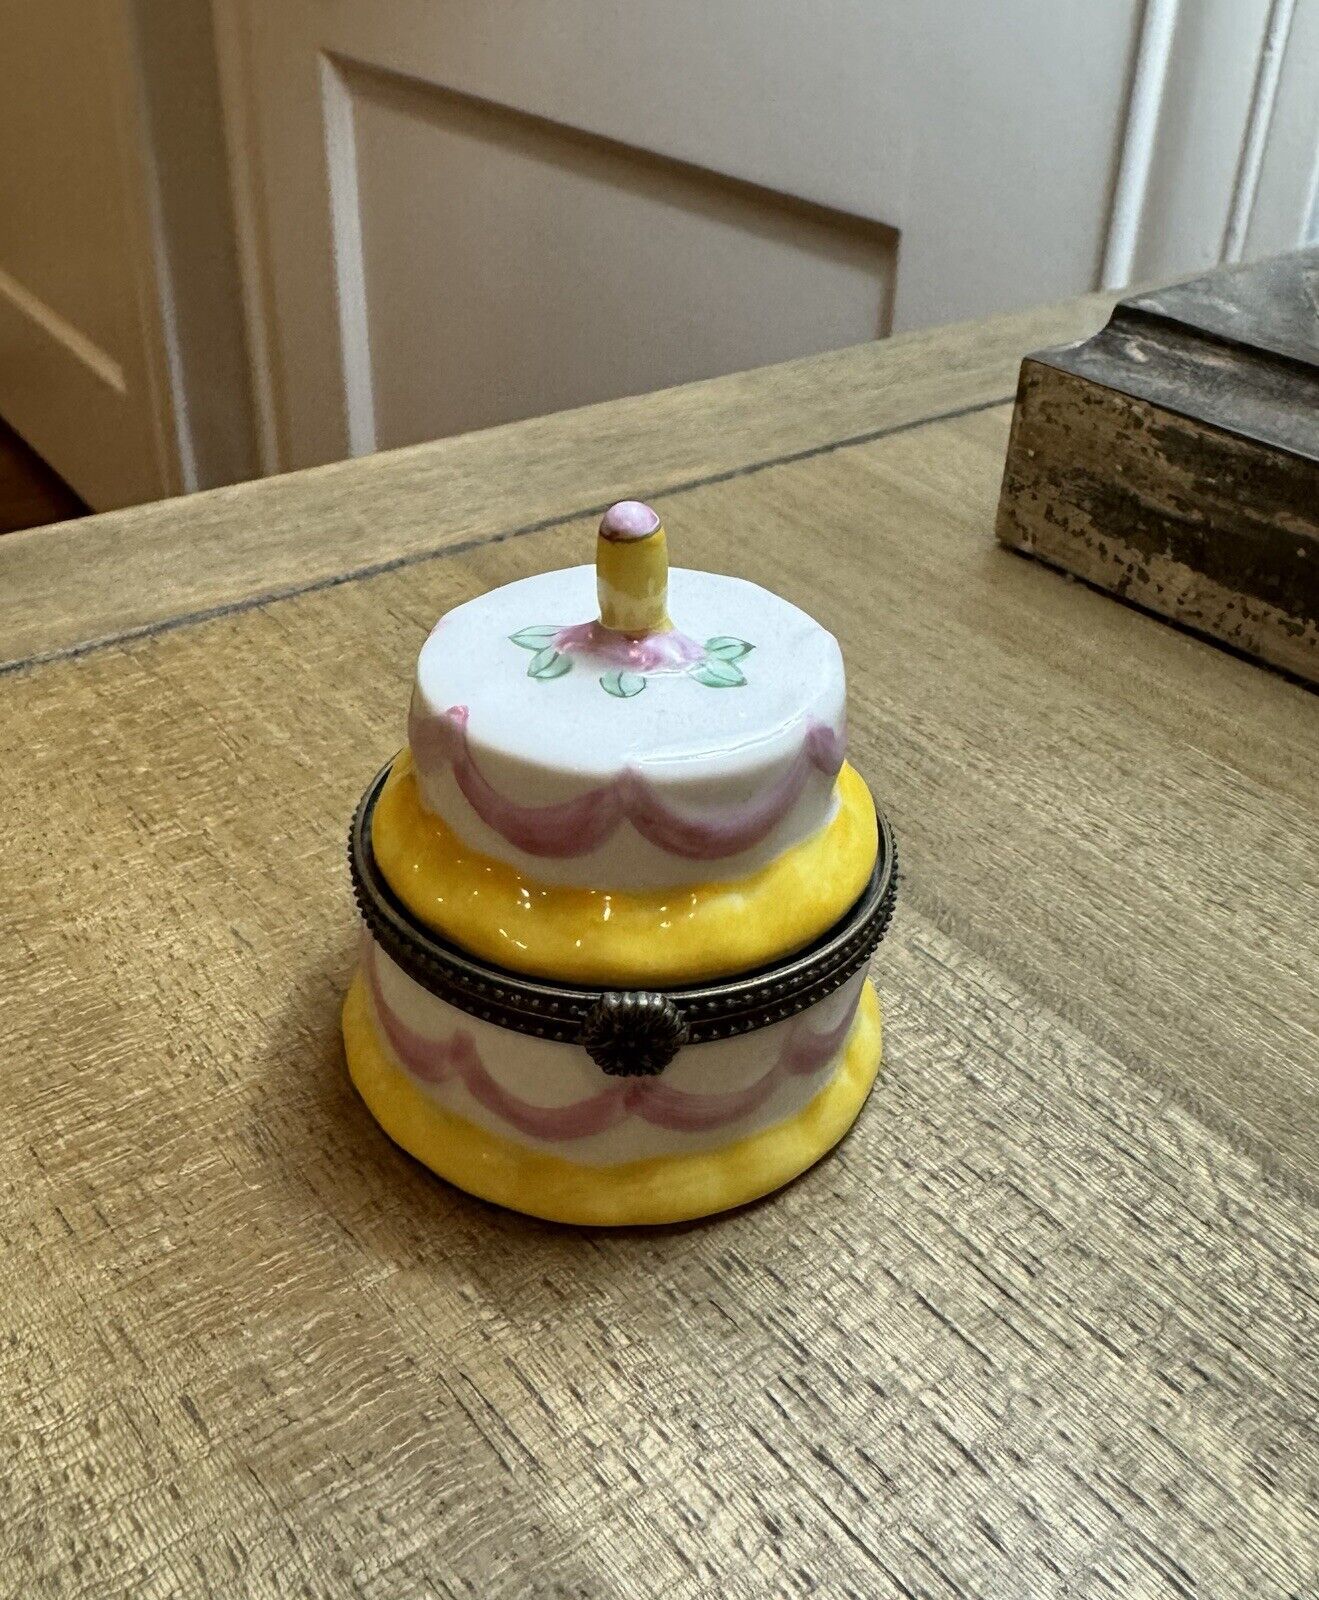 Vintage Hand Painted Porcelain Hinged Birthday Cake Trinket Box with Candle